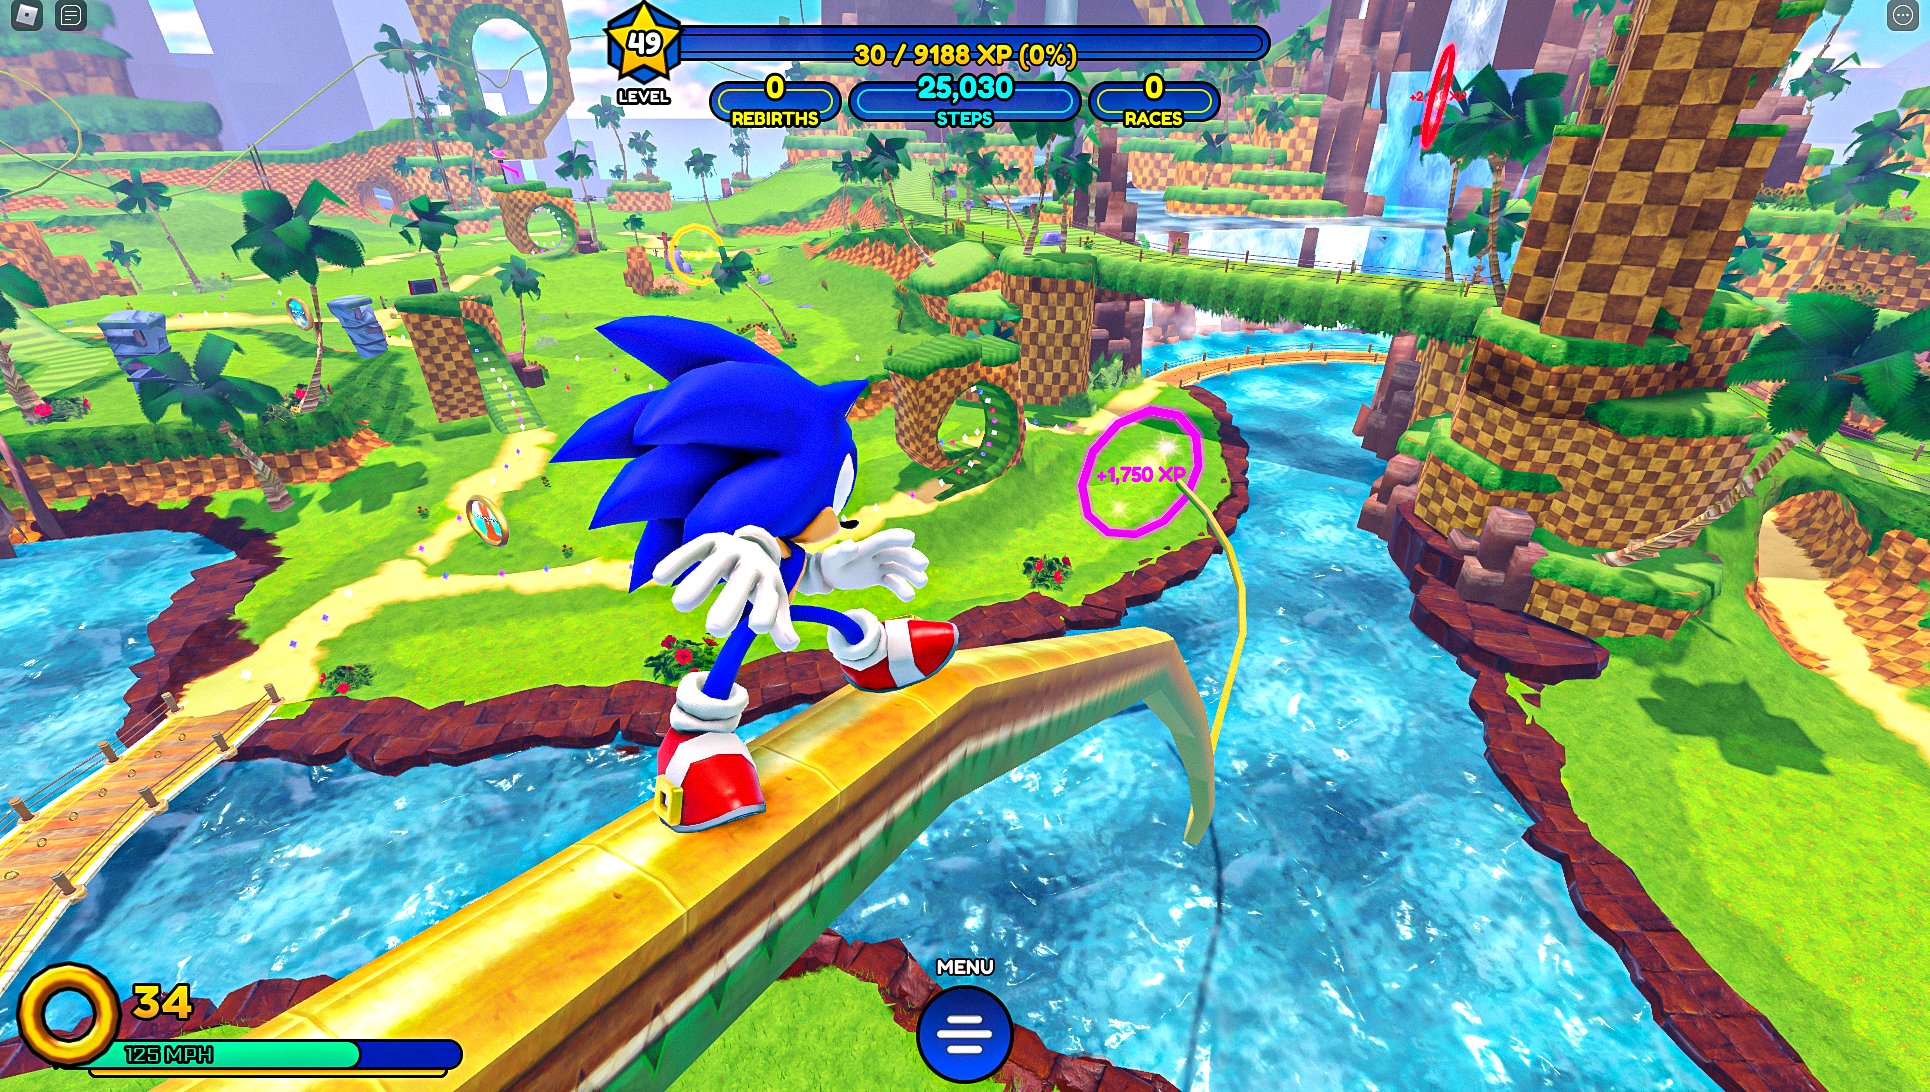 Official Sonic the Hedgehog Open-World Roblox Game Available; Sonic Speed Simulator